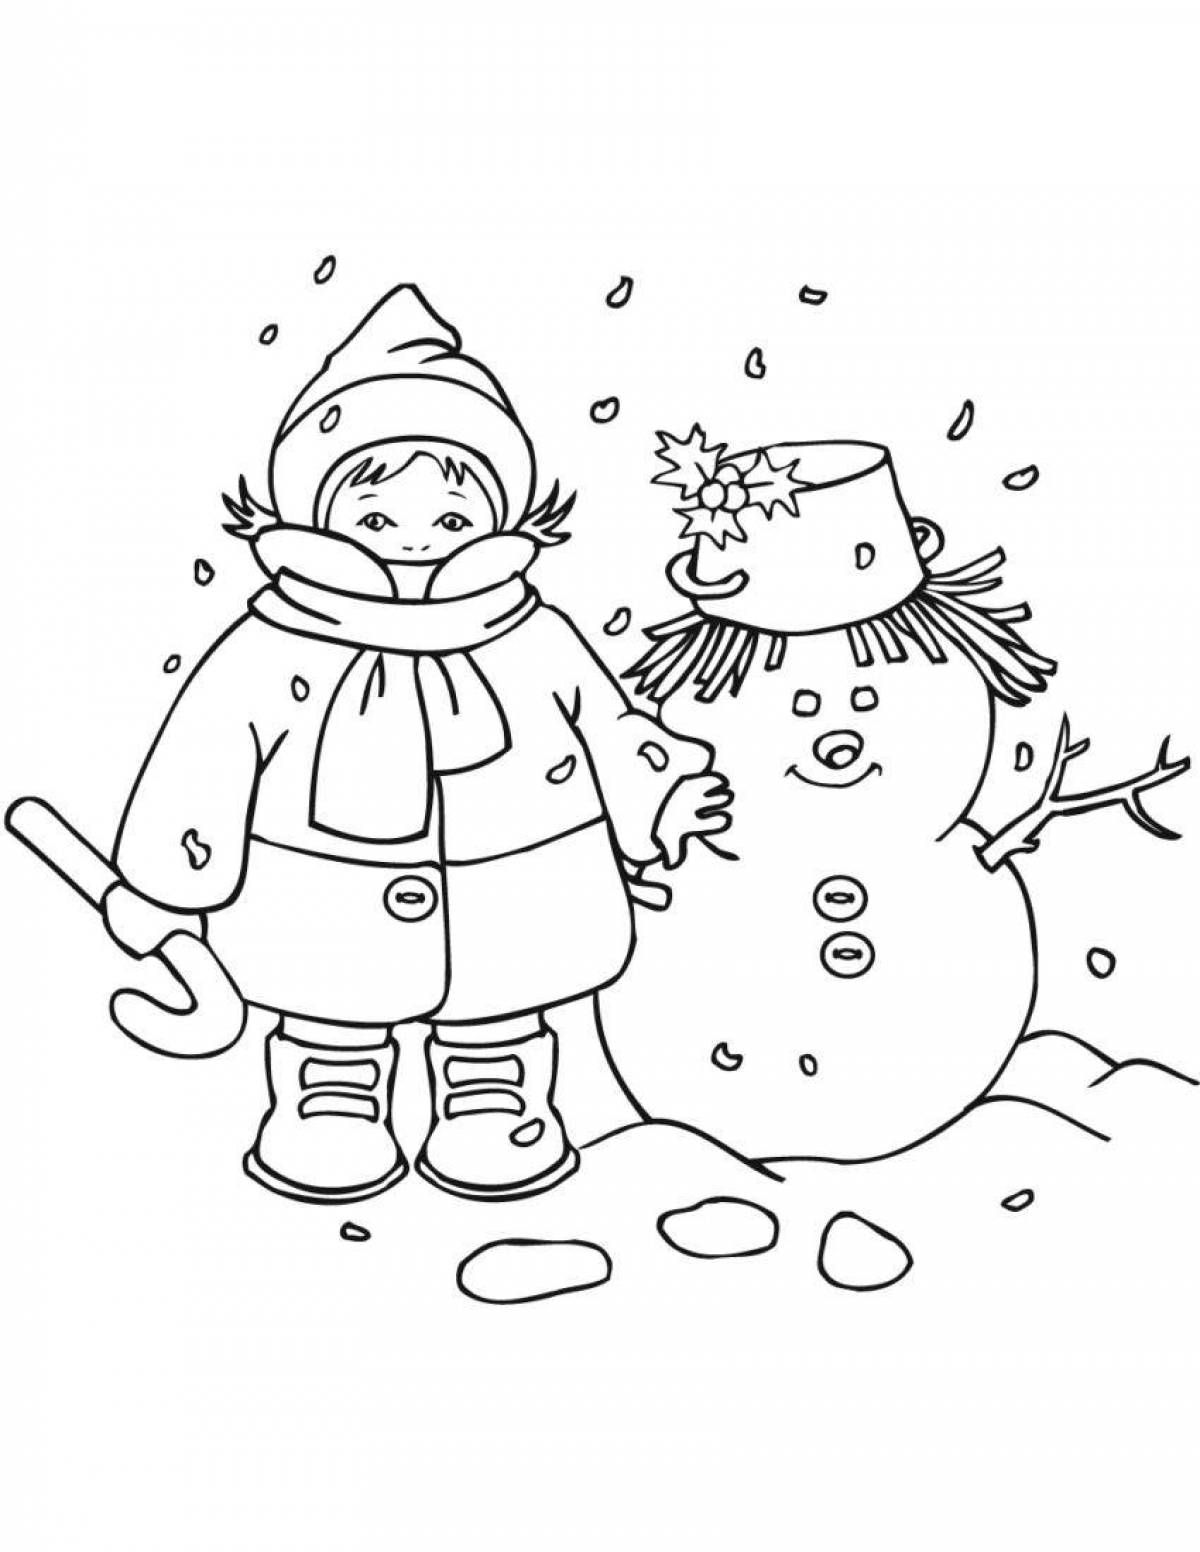 Coloring page glowing snowman girl